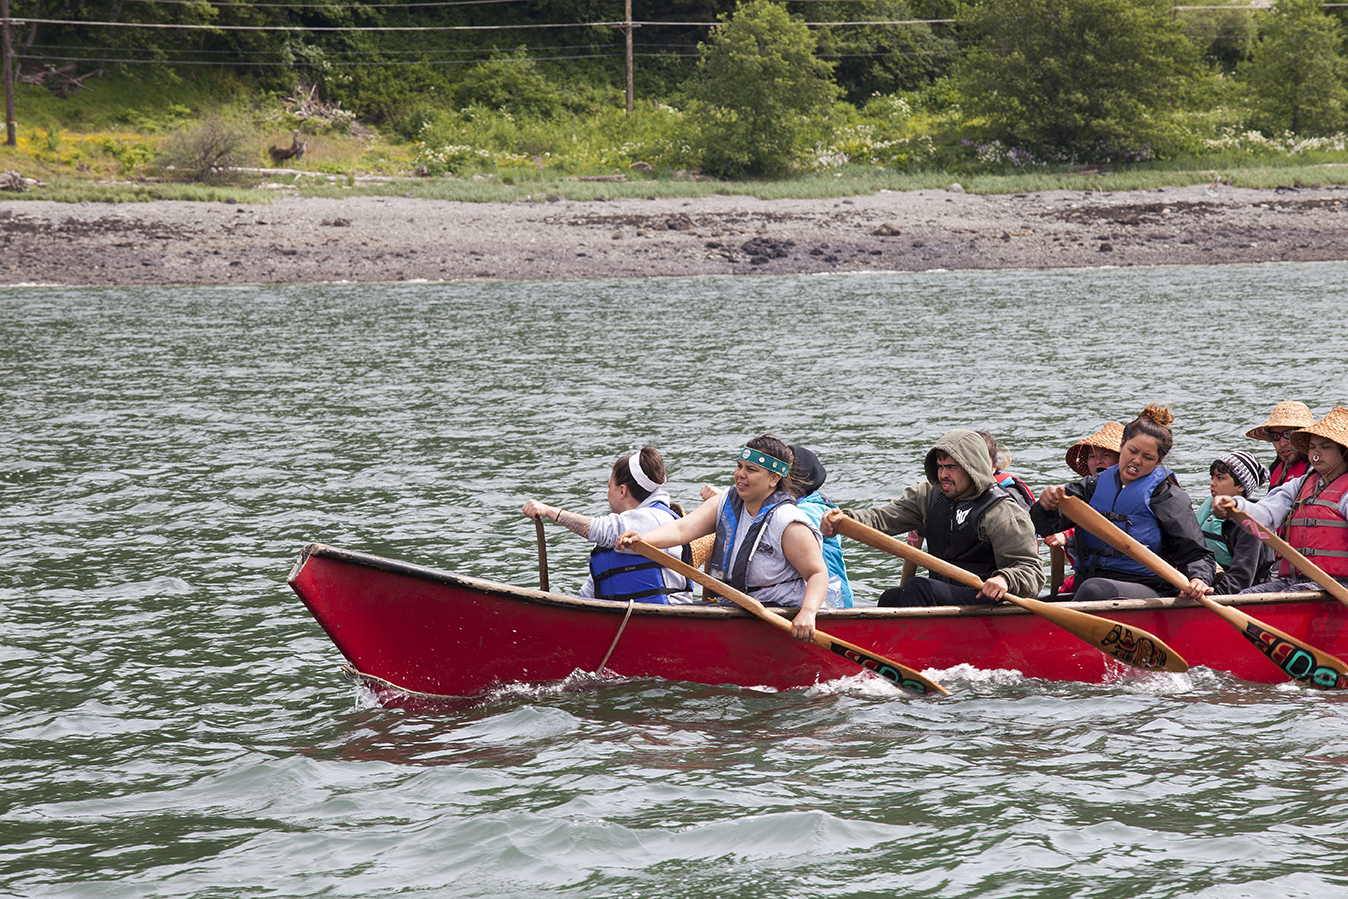 Members of the One People Canoe Society push during the last leg of their journey on Wednesday, June 8, 2016, near Juneau, Alaska. The group began the trip to Juneau from Angoon on June 2. Their trip is the unofficial beginning of Celebration. (Photo by Rashah McChesney, KTOO - Juneau)